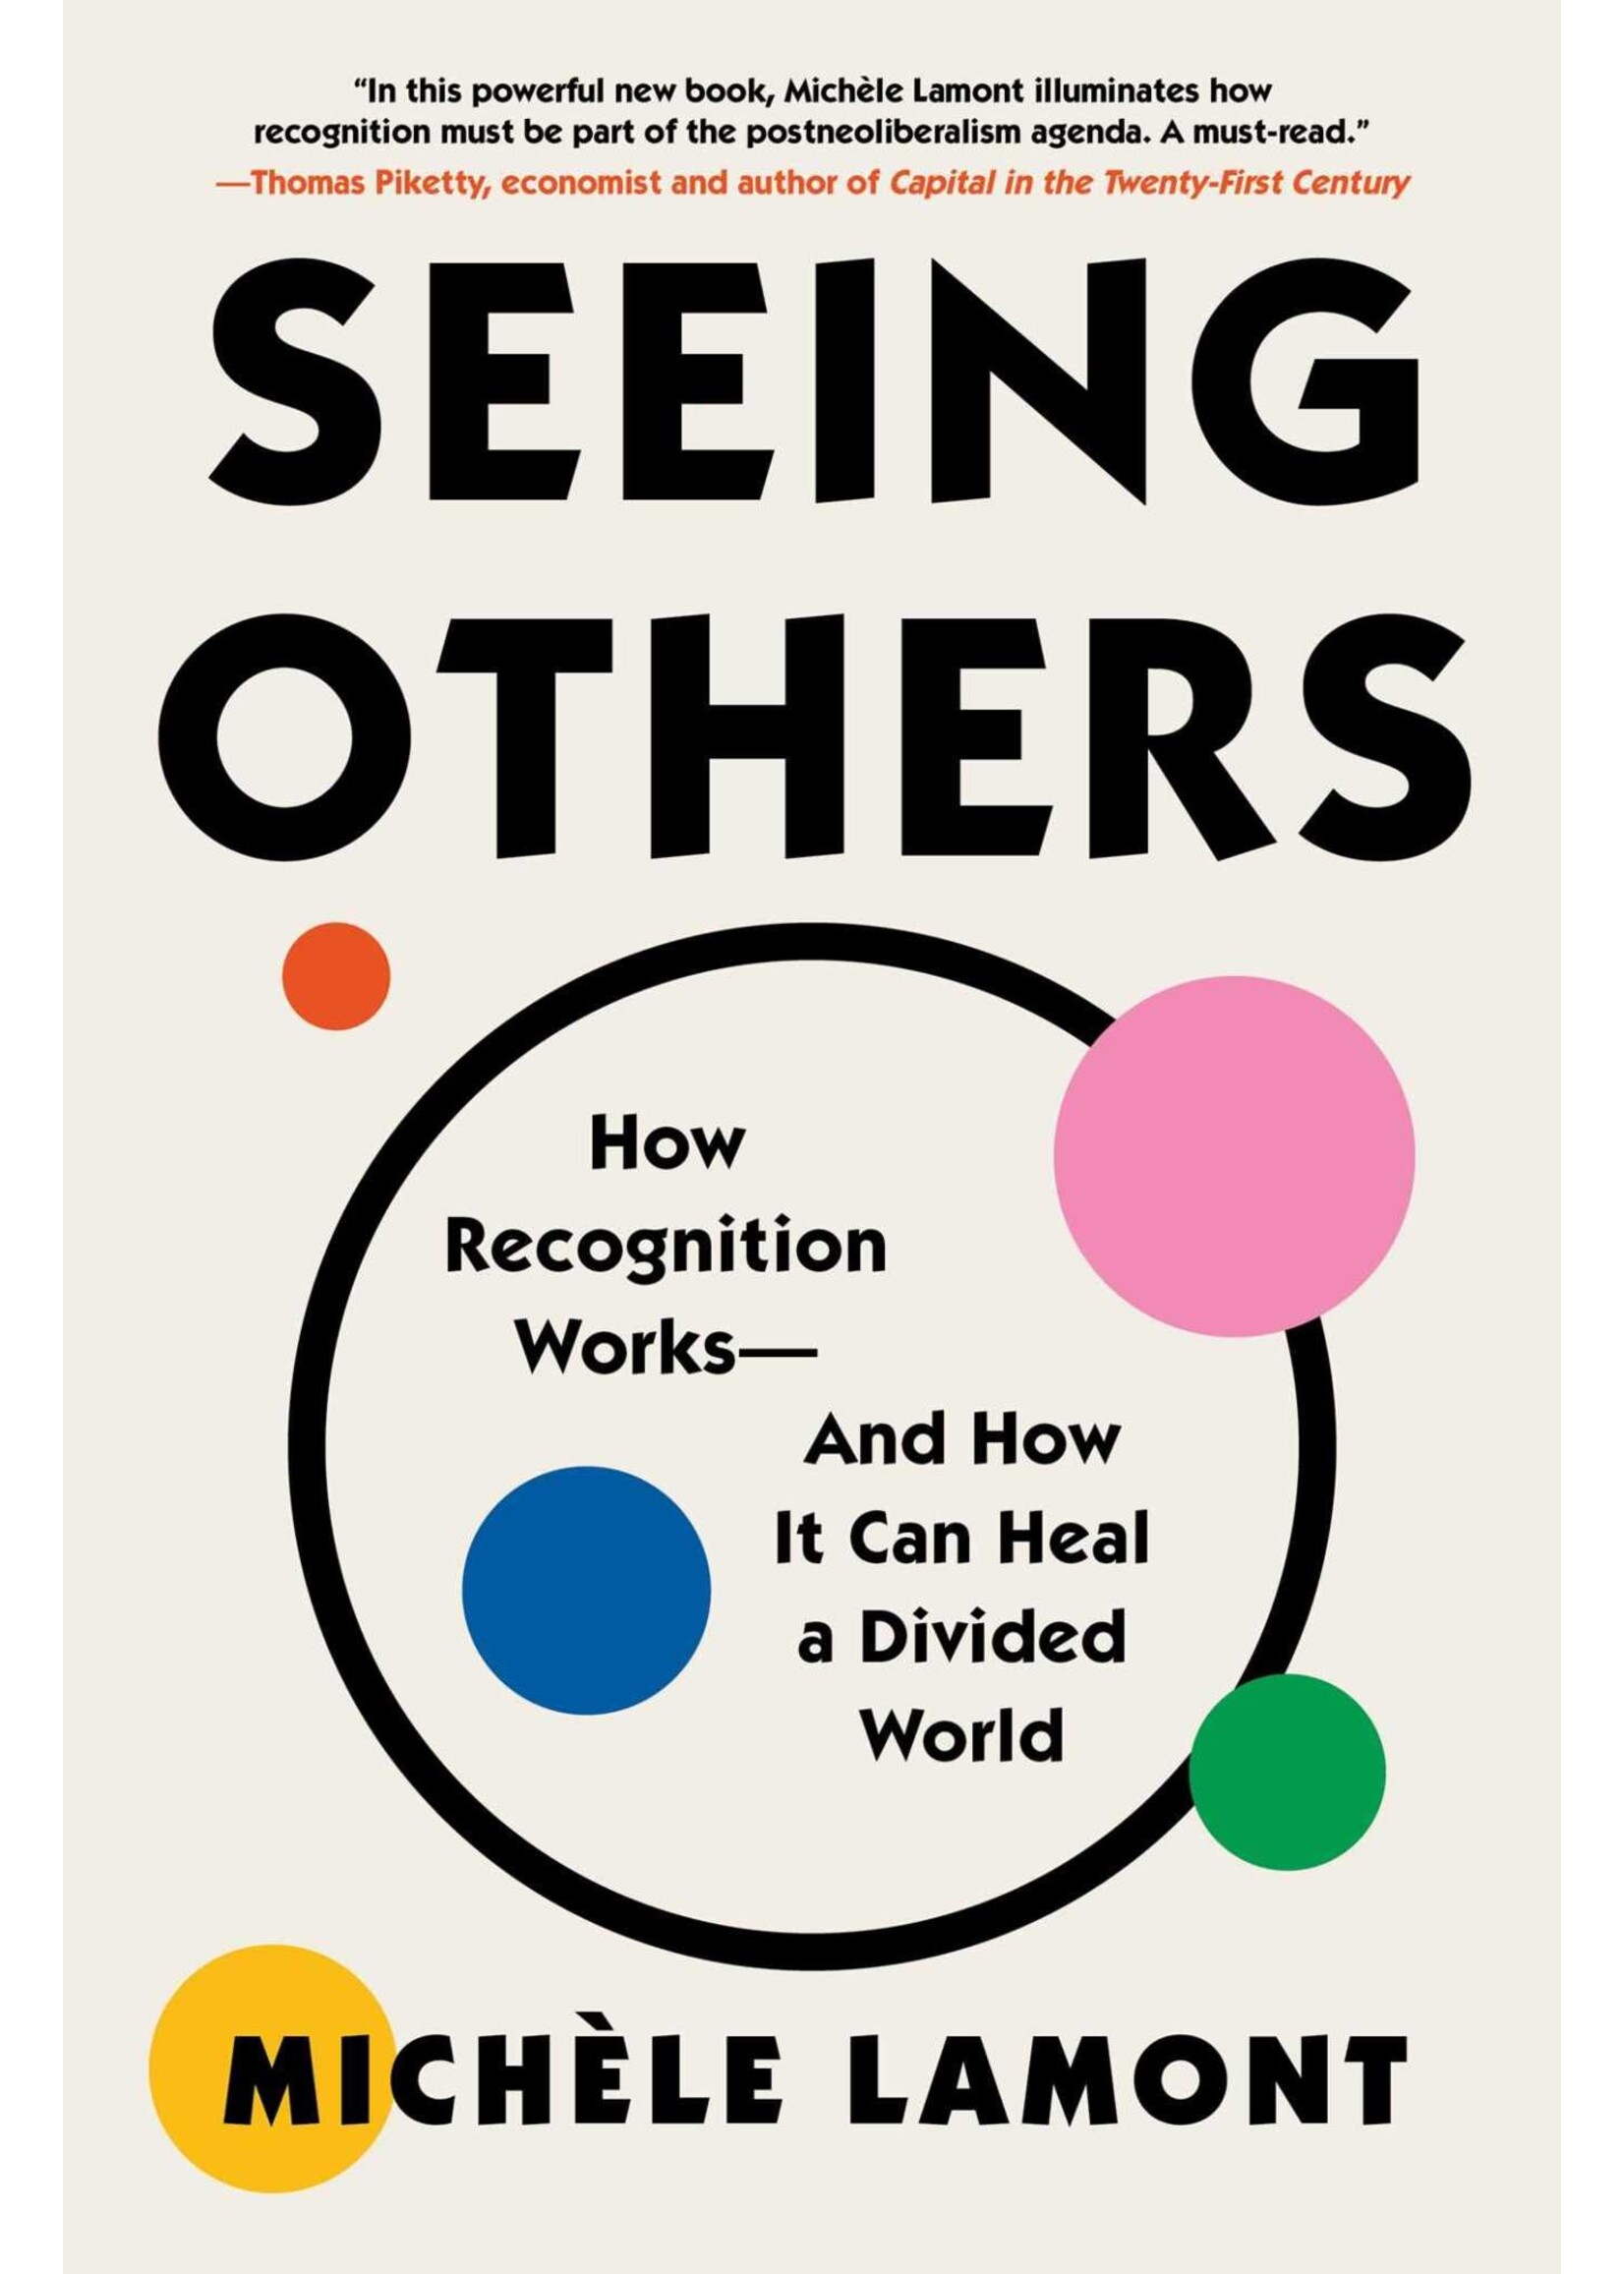 Seeing Others: How Recognition Works—and How It Can Heal a Divided World by Michèle Lamont